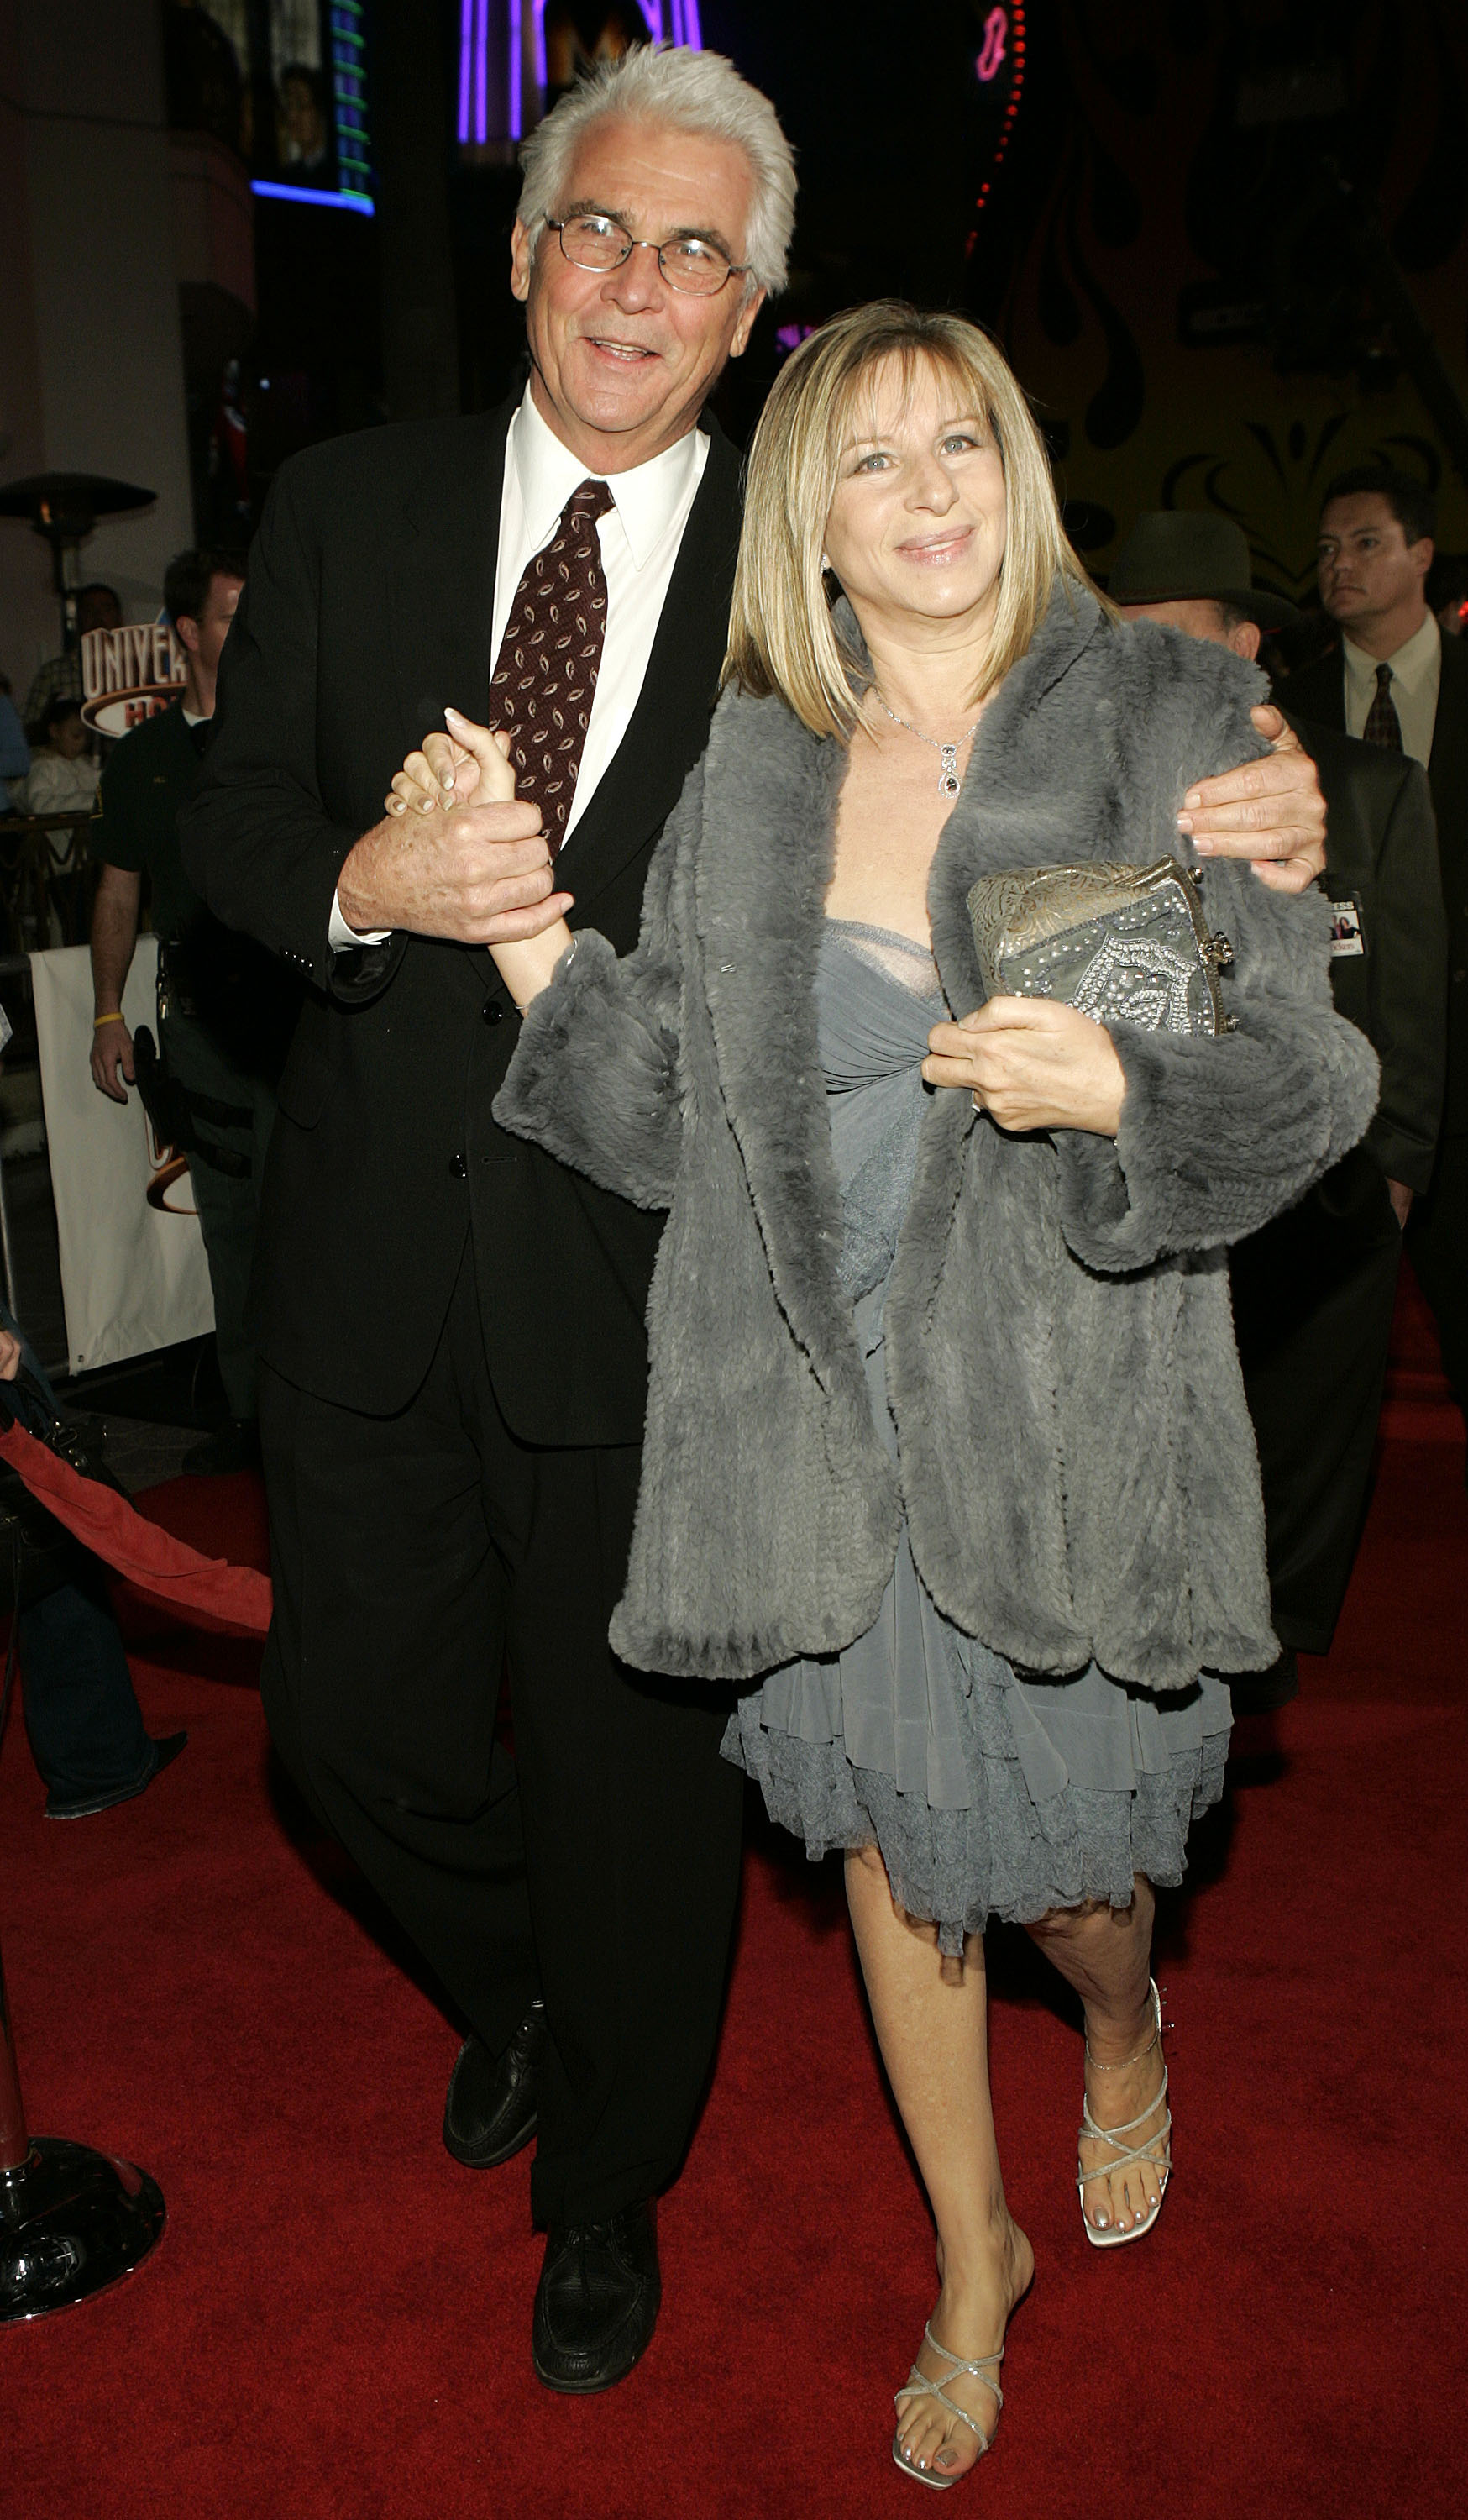 James Brolin and Barbra Streisand at the premiere of "Meet the Fockers" in Universal City, California in 2004 | Source: Getty Images